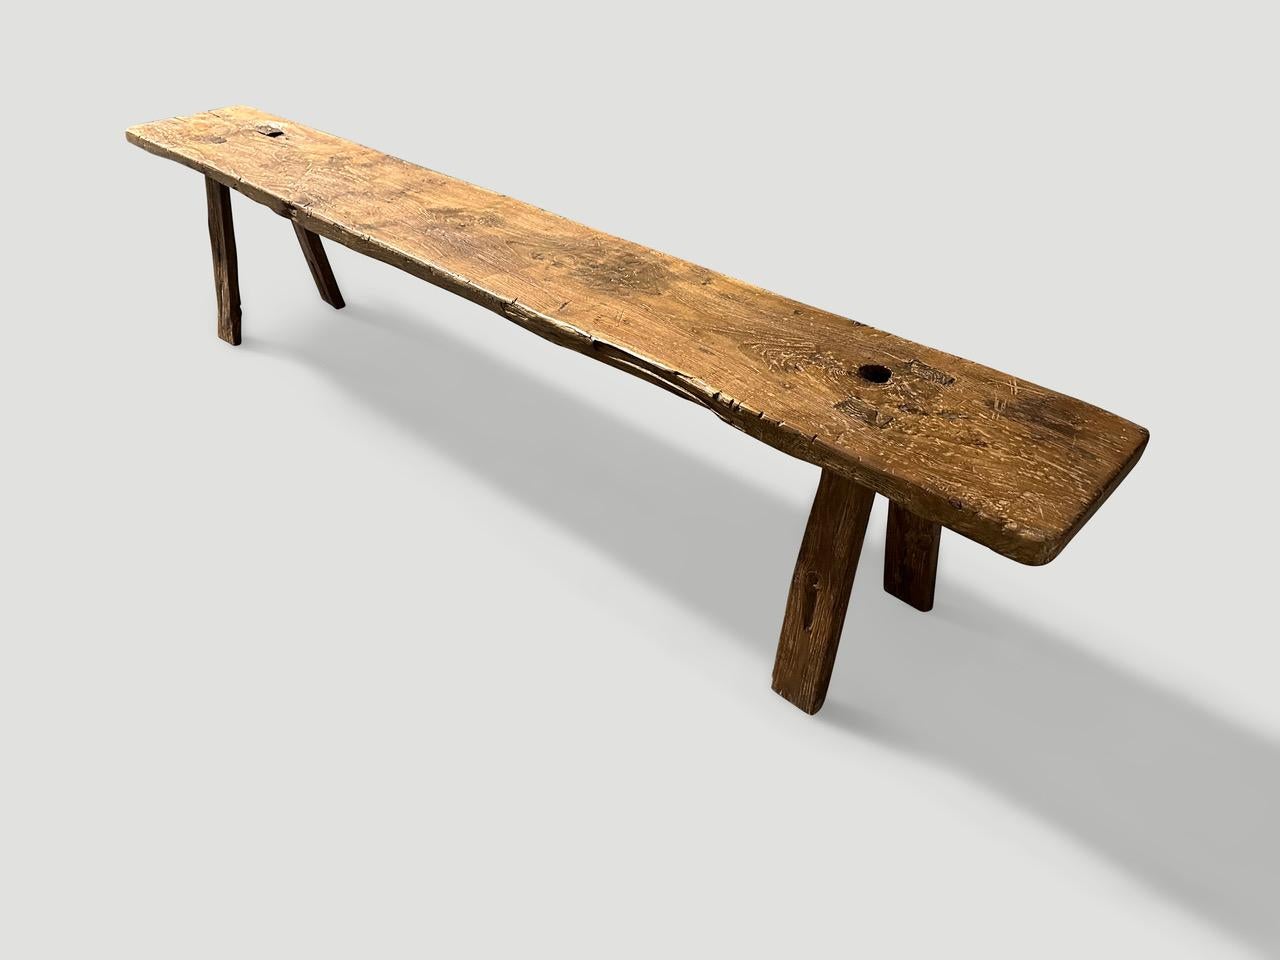 Antique bench hand made from a thick single panel of teak wood with lovely patina. Circa 1950.

This bench was hand made in the spirit of Wabi-Sabi, a Japanese philosophy that beauty can be found in imperfection and impermanence. It is a beauty of